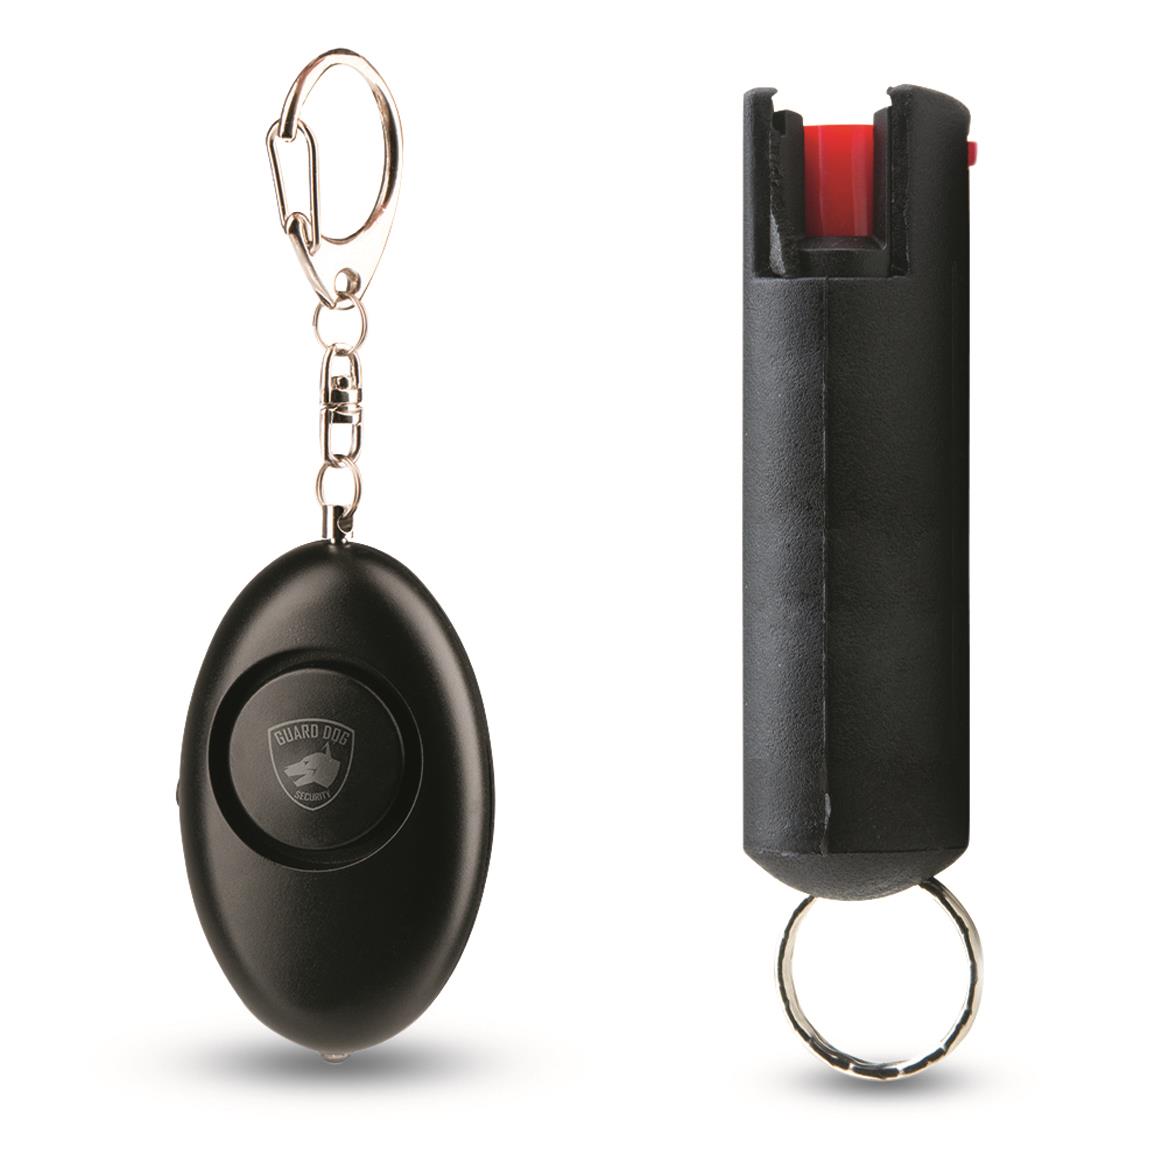 Guard Dog Security Personal Alarm and Quick Action Pepper Spray, Black